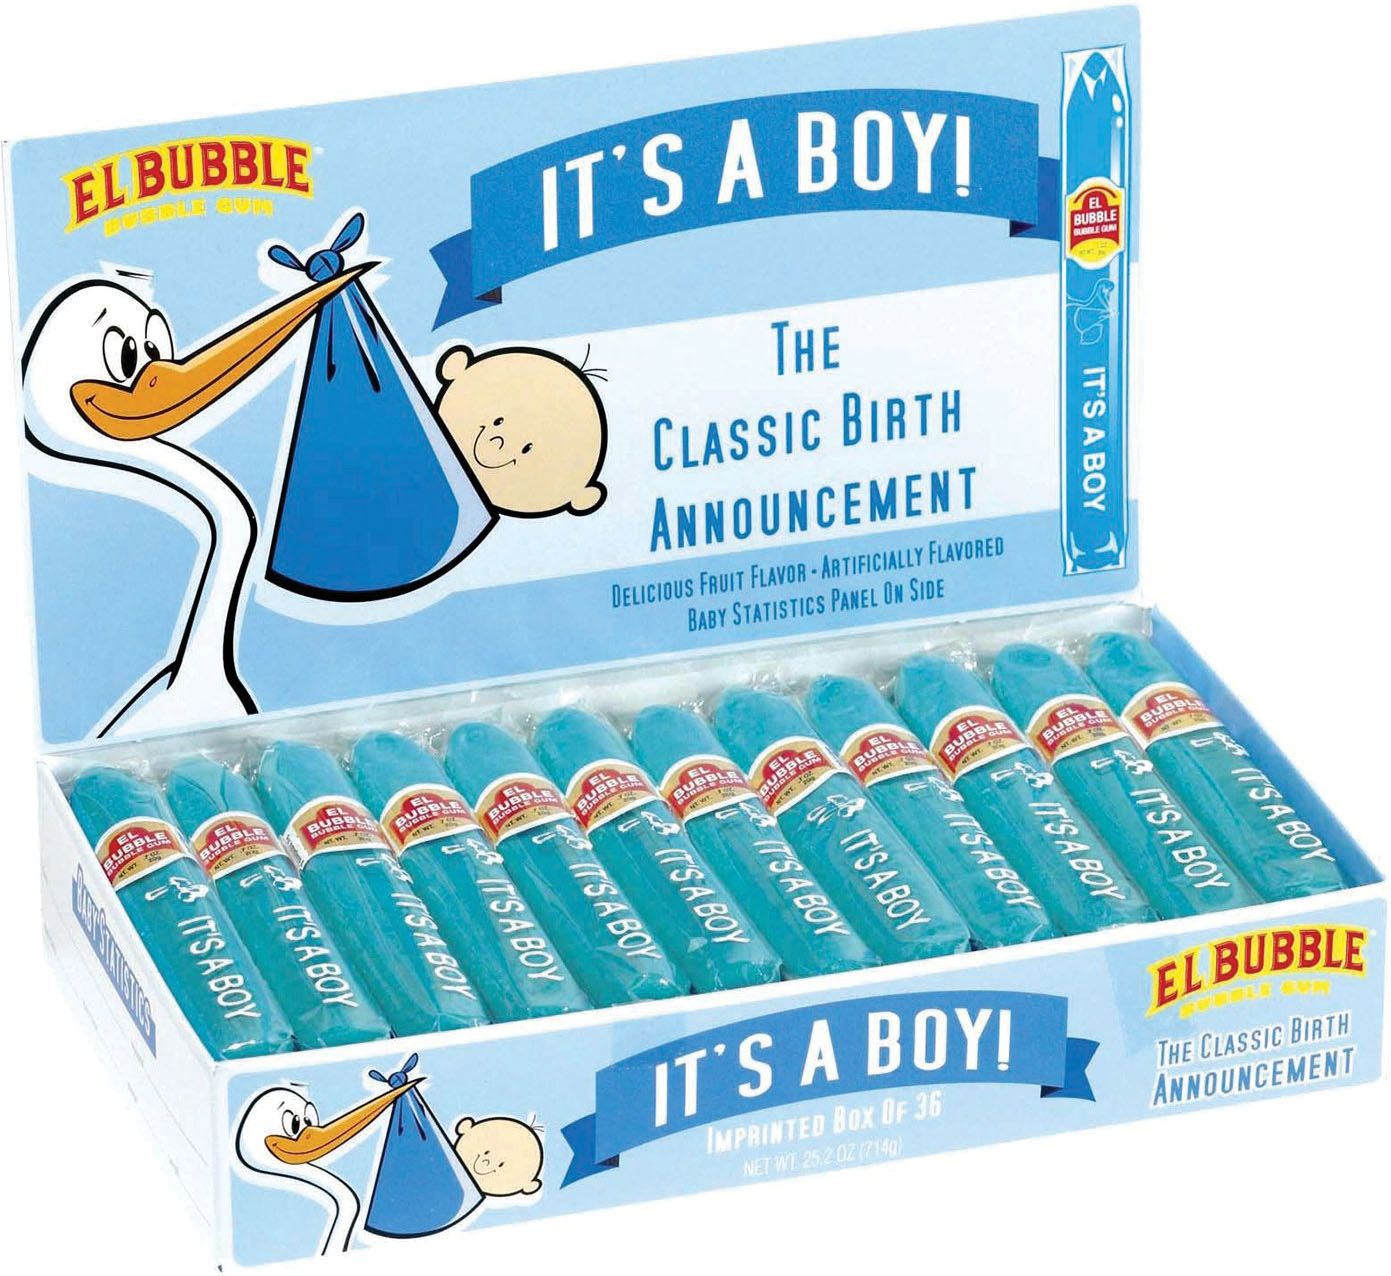 A box of 'It's a boy!' baby announcement candy cigars in blue